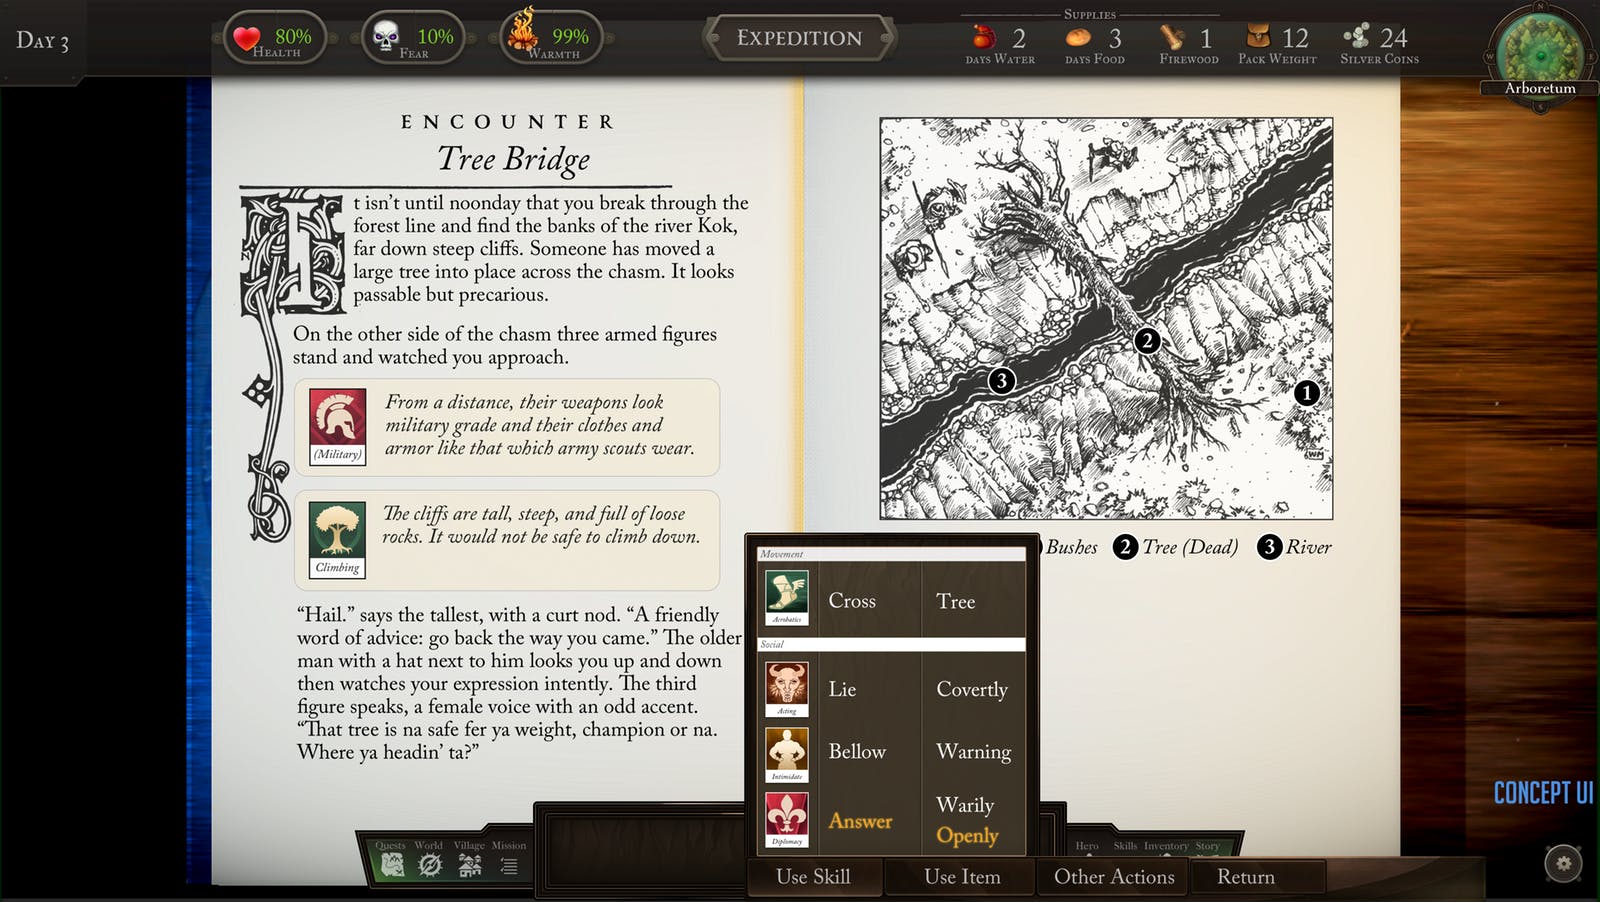 The Hero of Deathtrap Dungeon Screenshot - Tree bridge encounter: text and illustration